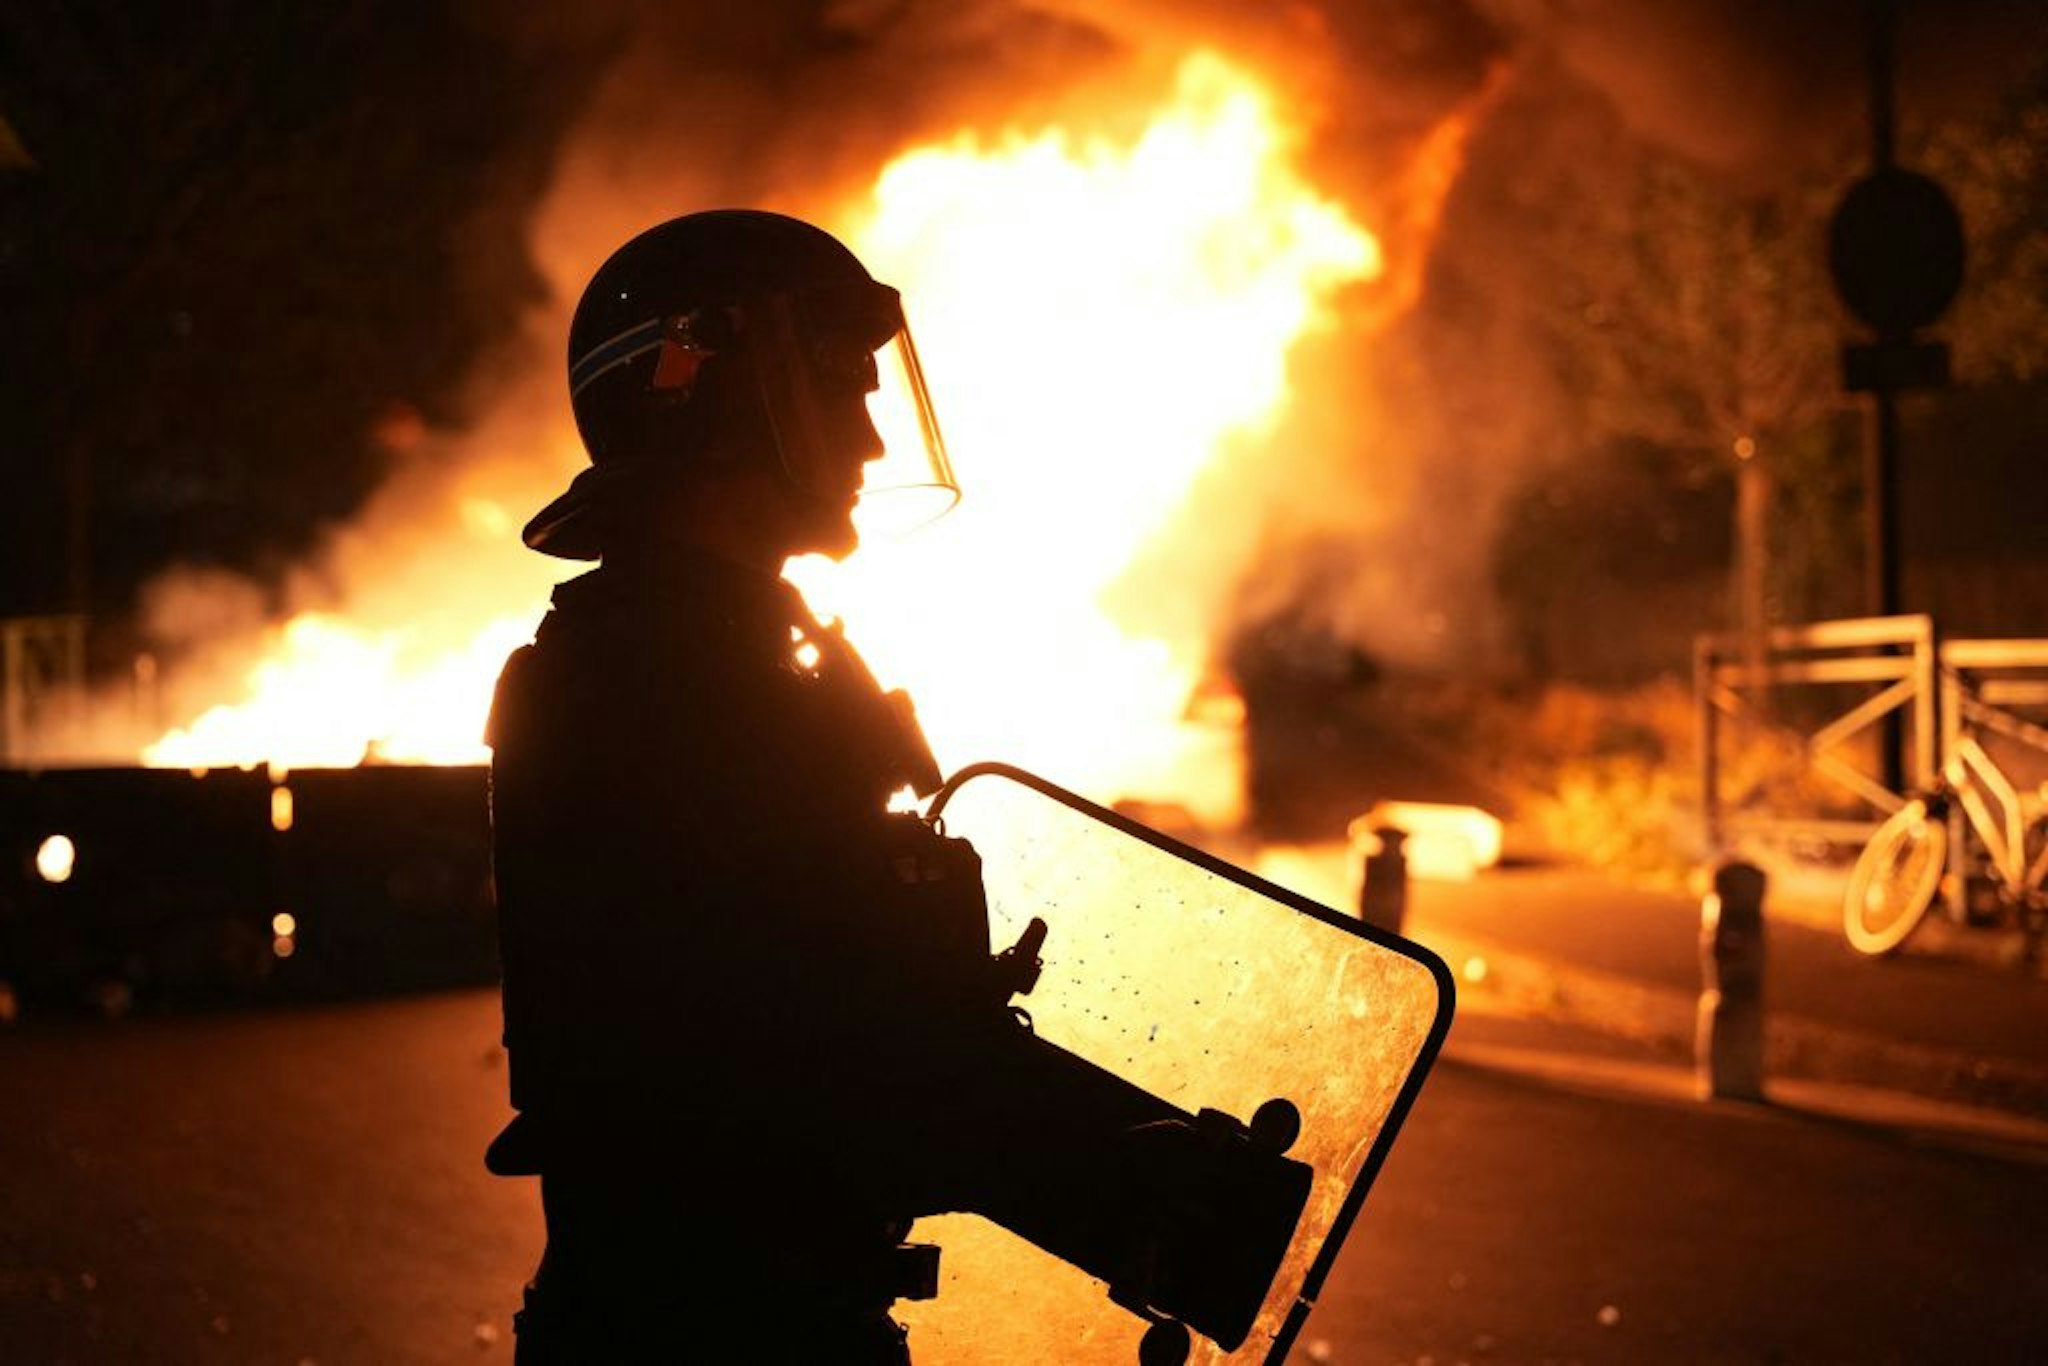 TOPSHOT - A firefighter looks on as vehicles burn following riots in Nanterre, west of Paris, on June 28, 2023, a day after a 17-year-old boy was shot in the chest by police at point-blank range in this western suburb of Paris. Violent protests broke out in France in the early hours of June 29, 2023, as anger grows over the police killing of a teenager, with security forces arresting 150 people in the chaos that saw balaclava-clad protesters burning cars and setting off fireworks. Nahel M., 17, was shot in the chest at point-blank range on June 27, 2023, morning in an incident that has reignited debate in France about police tactics long criticised by rights groups over the treatment of people in low-income suburbs, particularly ethnic minorities. (Photo by Zakaria ABDELKAFI / AFP)